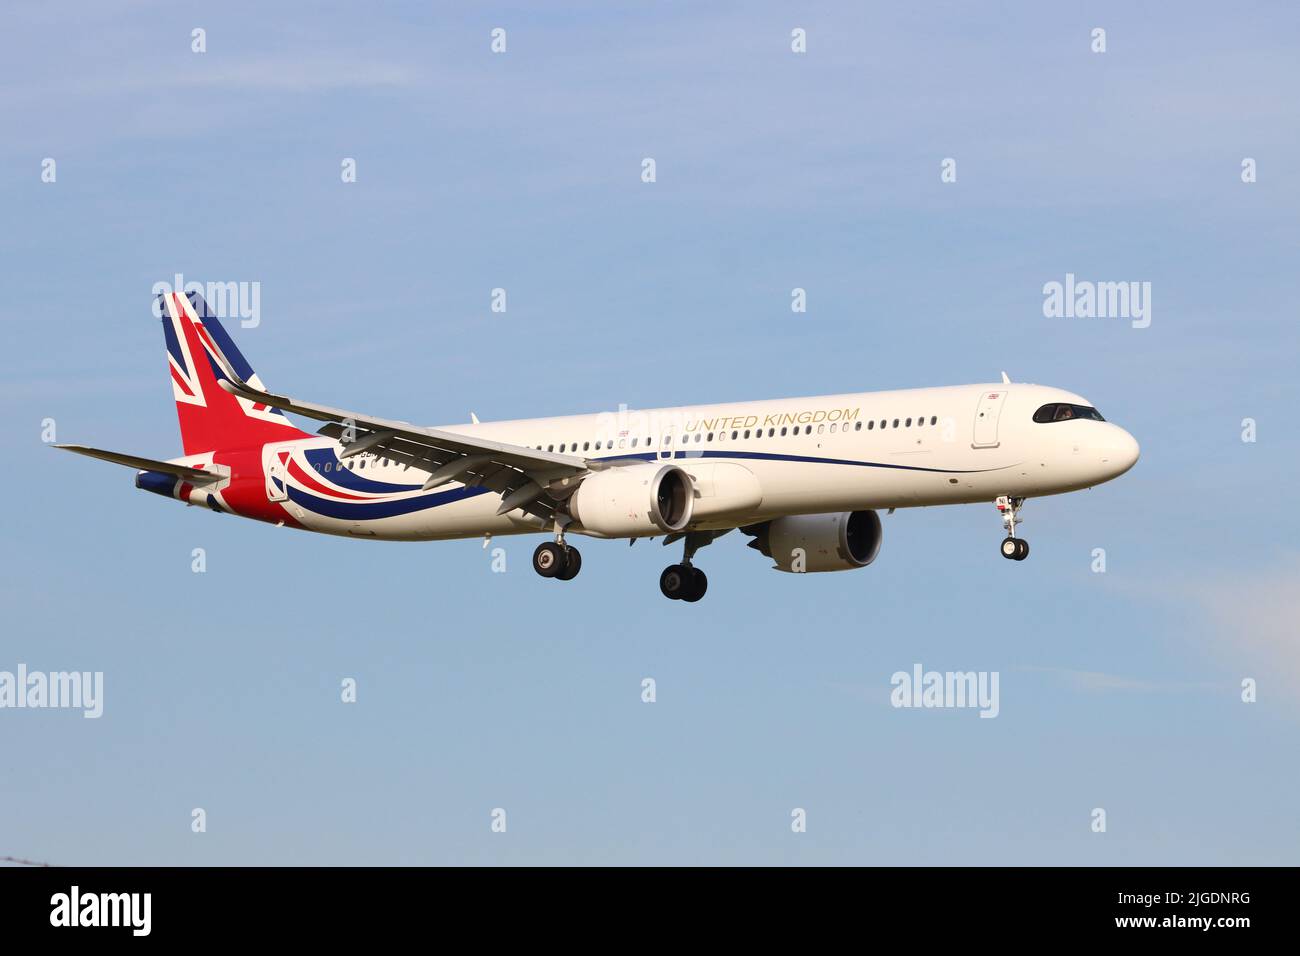 G-GBNI, Airbus A321, landing at Stansted Airport, Essex, UK - used for Government ministerial overseas visits Stock Photo